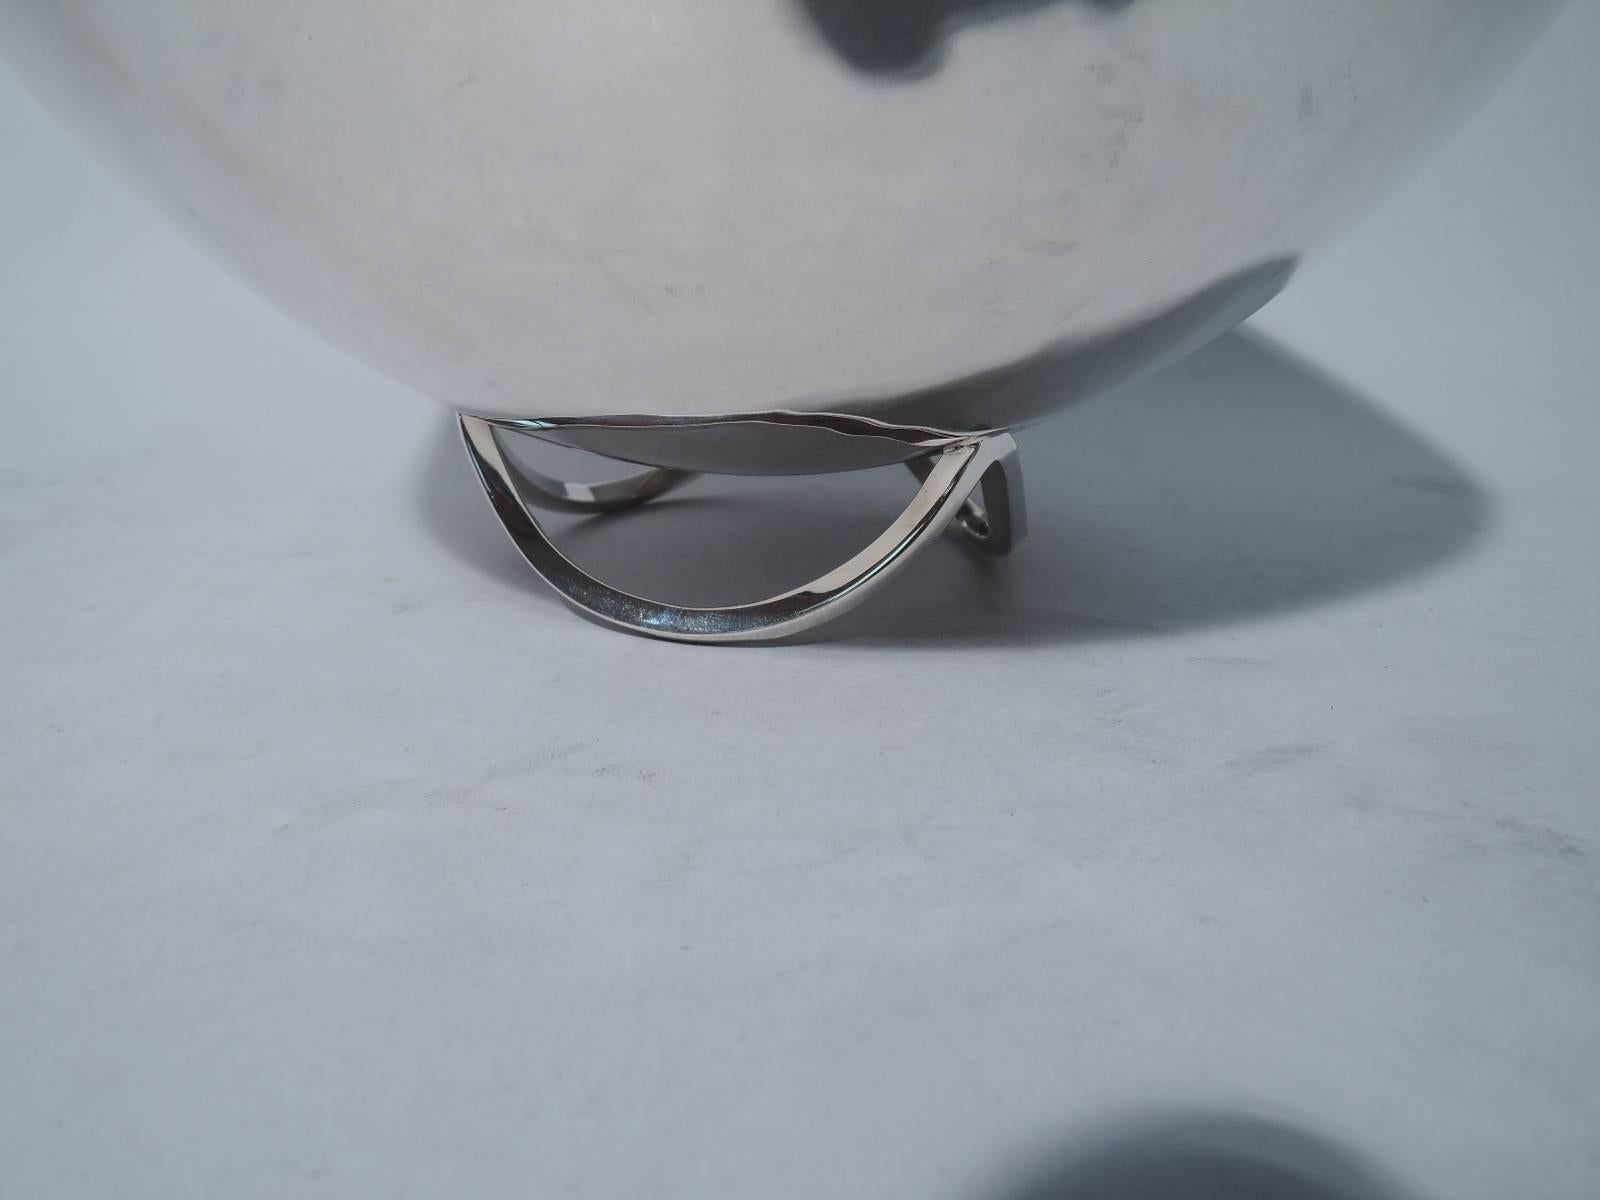 Mid-Century Modern sterling silver bowl. Made by Cartier in New York. Hemispheric bowl mounted to base comprising 3 joined arches. Visible hand hammering. A gorgeous mix of craftsmanship and abstraction. Hallmark includes no. S104. Fine